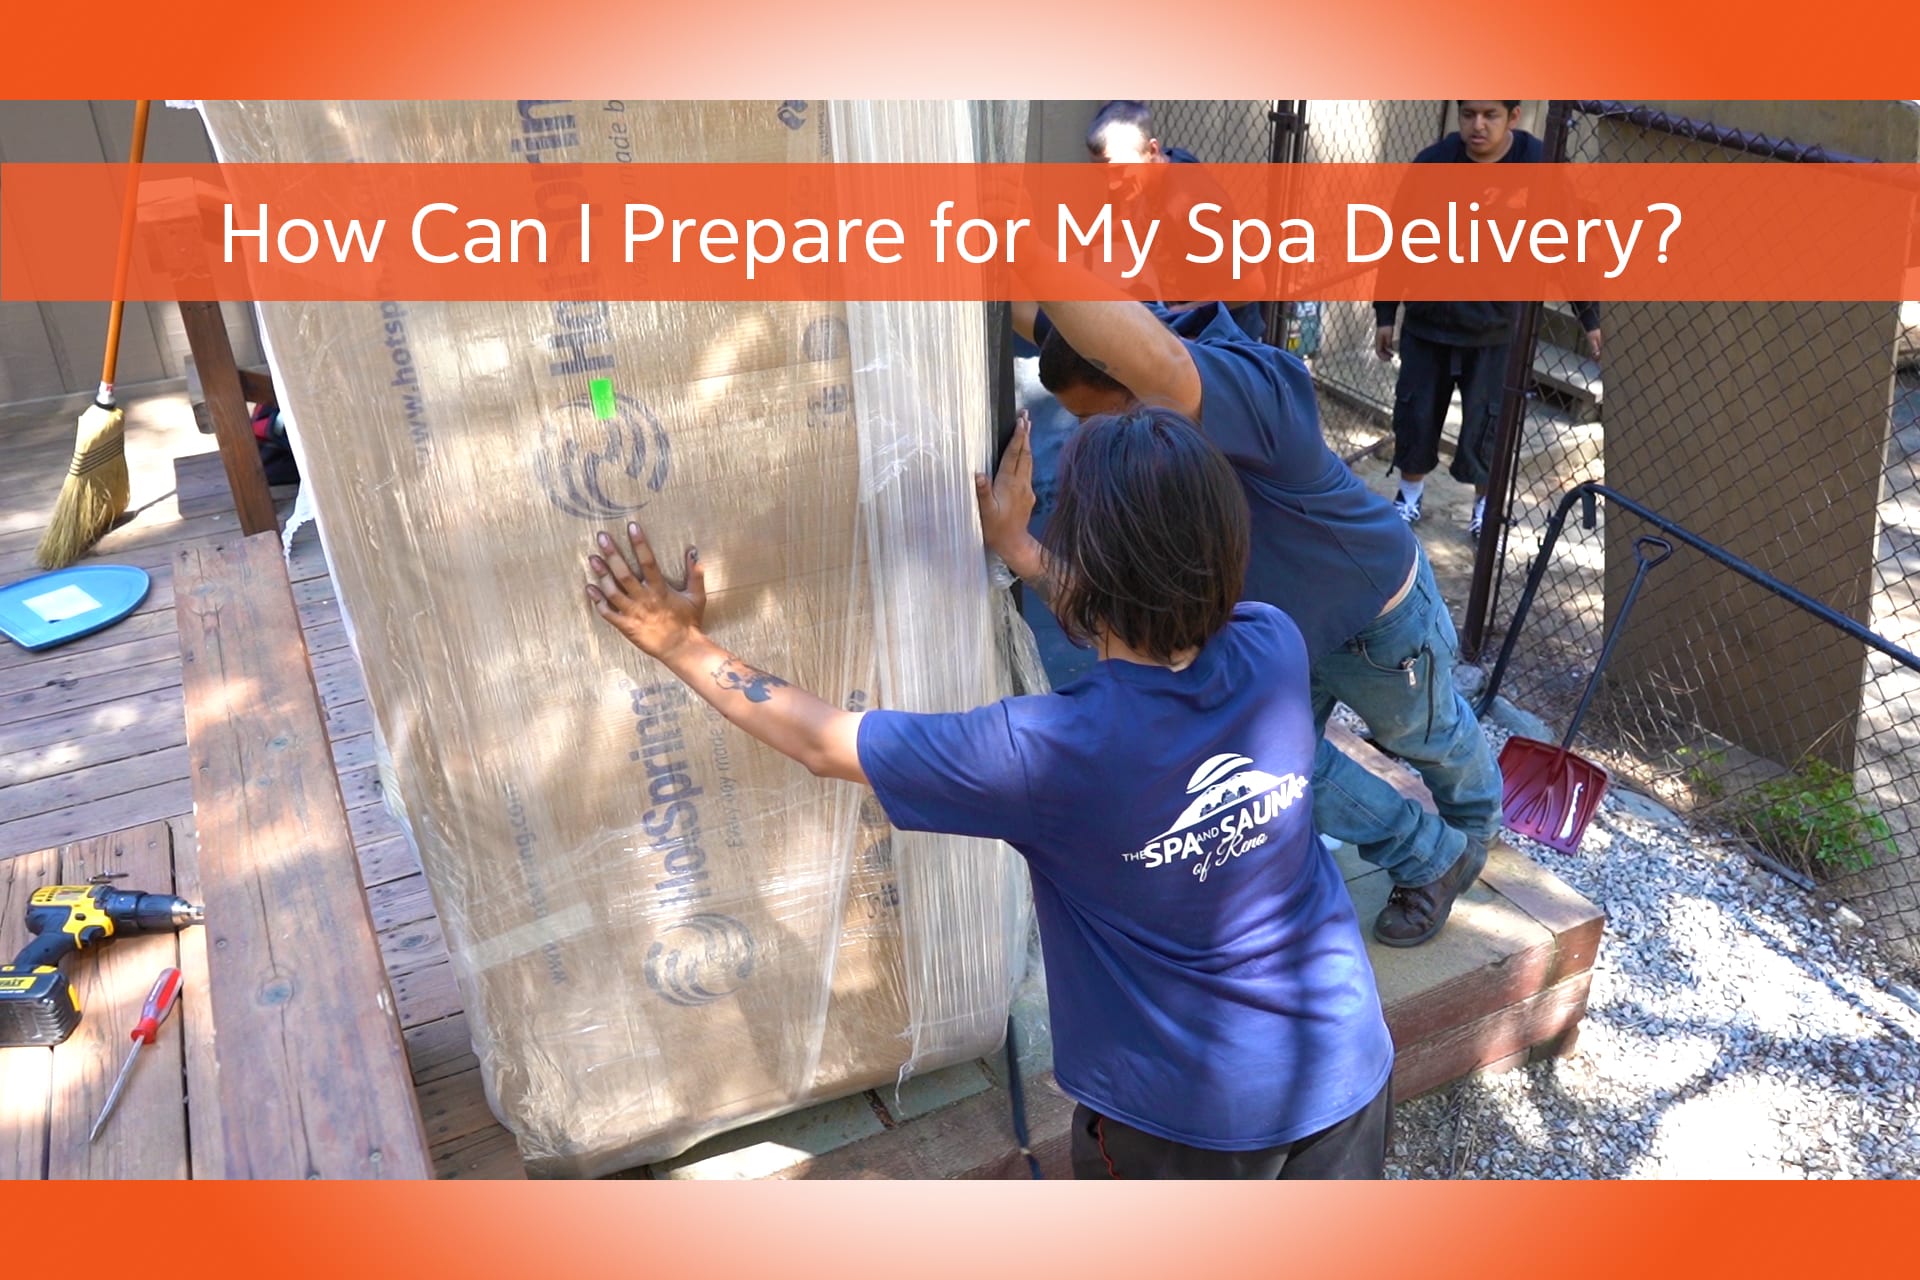 How Can I Prepare for My Spa Delivery?